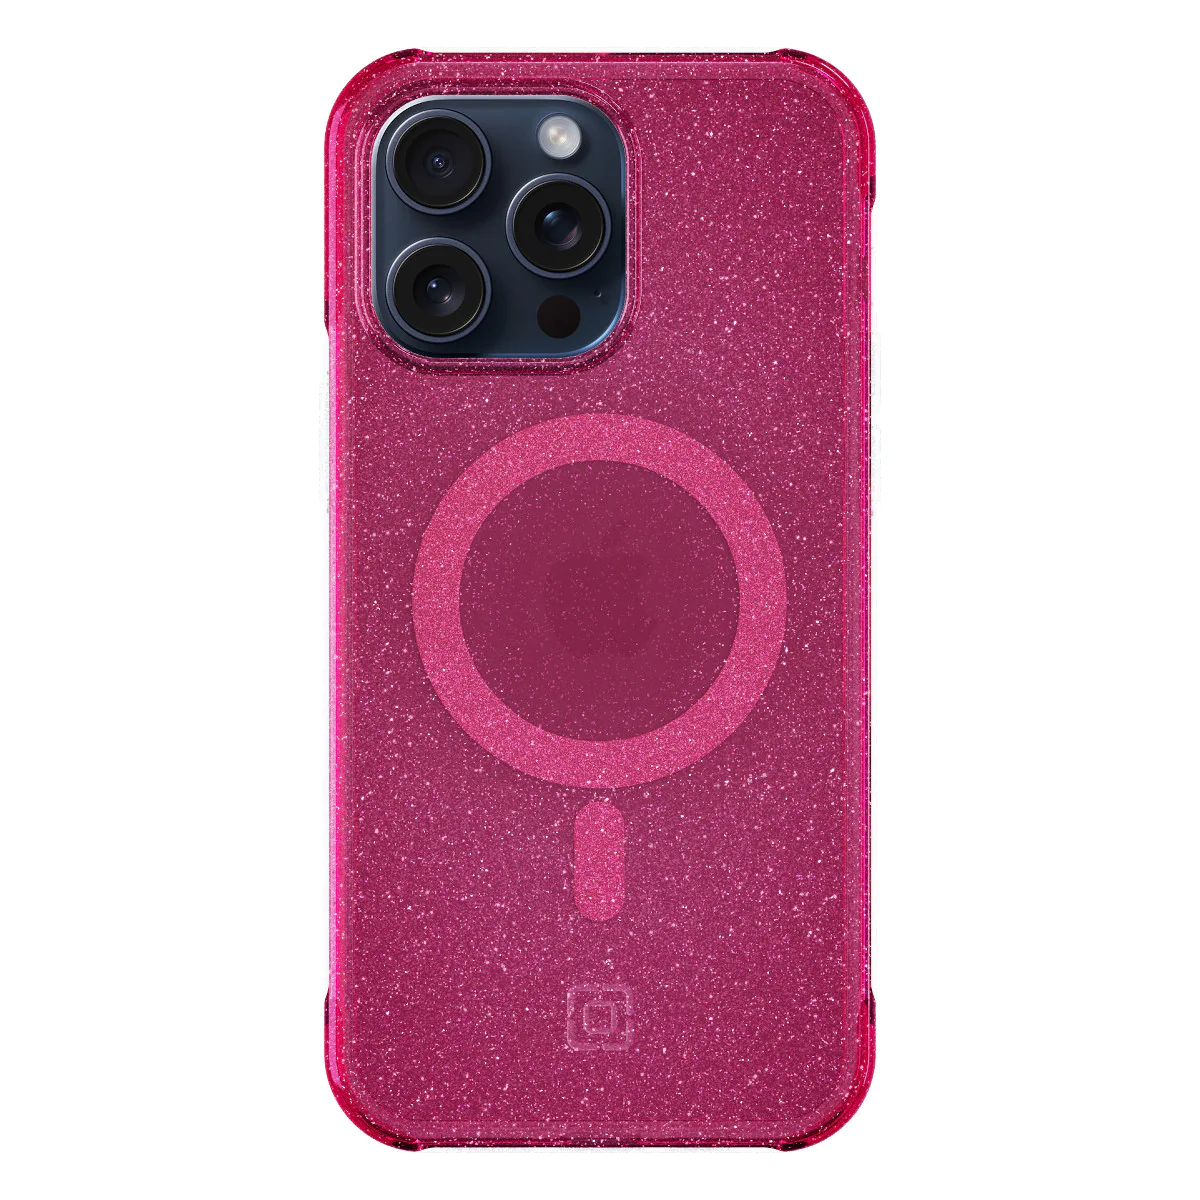 Incipio รุ่น Forme Protective for MagSafe - เคส iPhone 15 Pro Max - Pop Pink Glitter